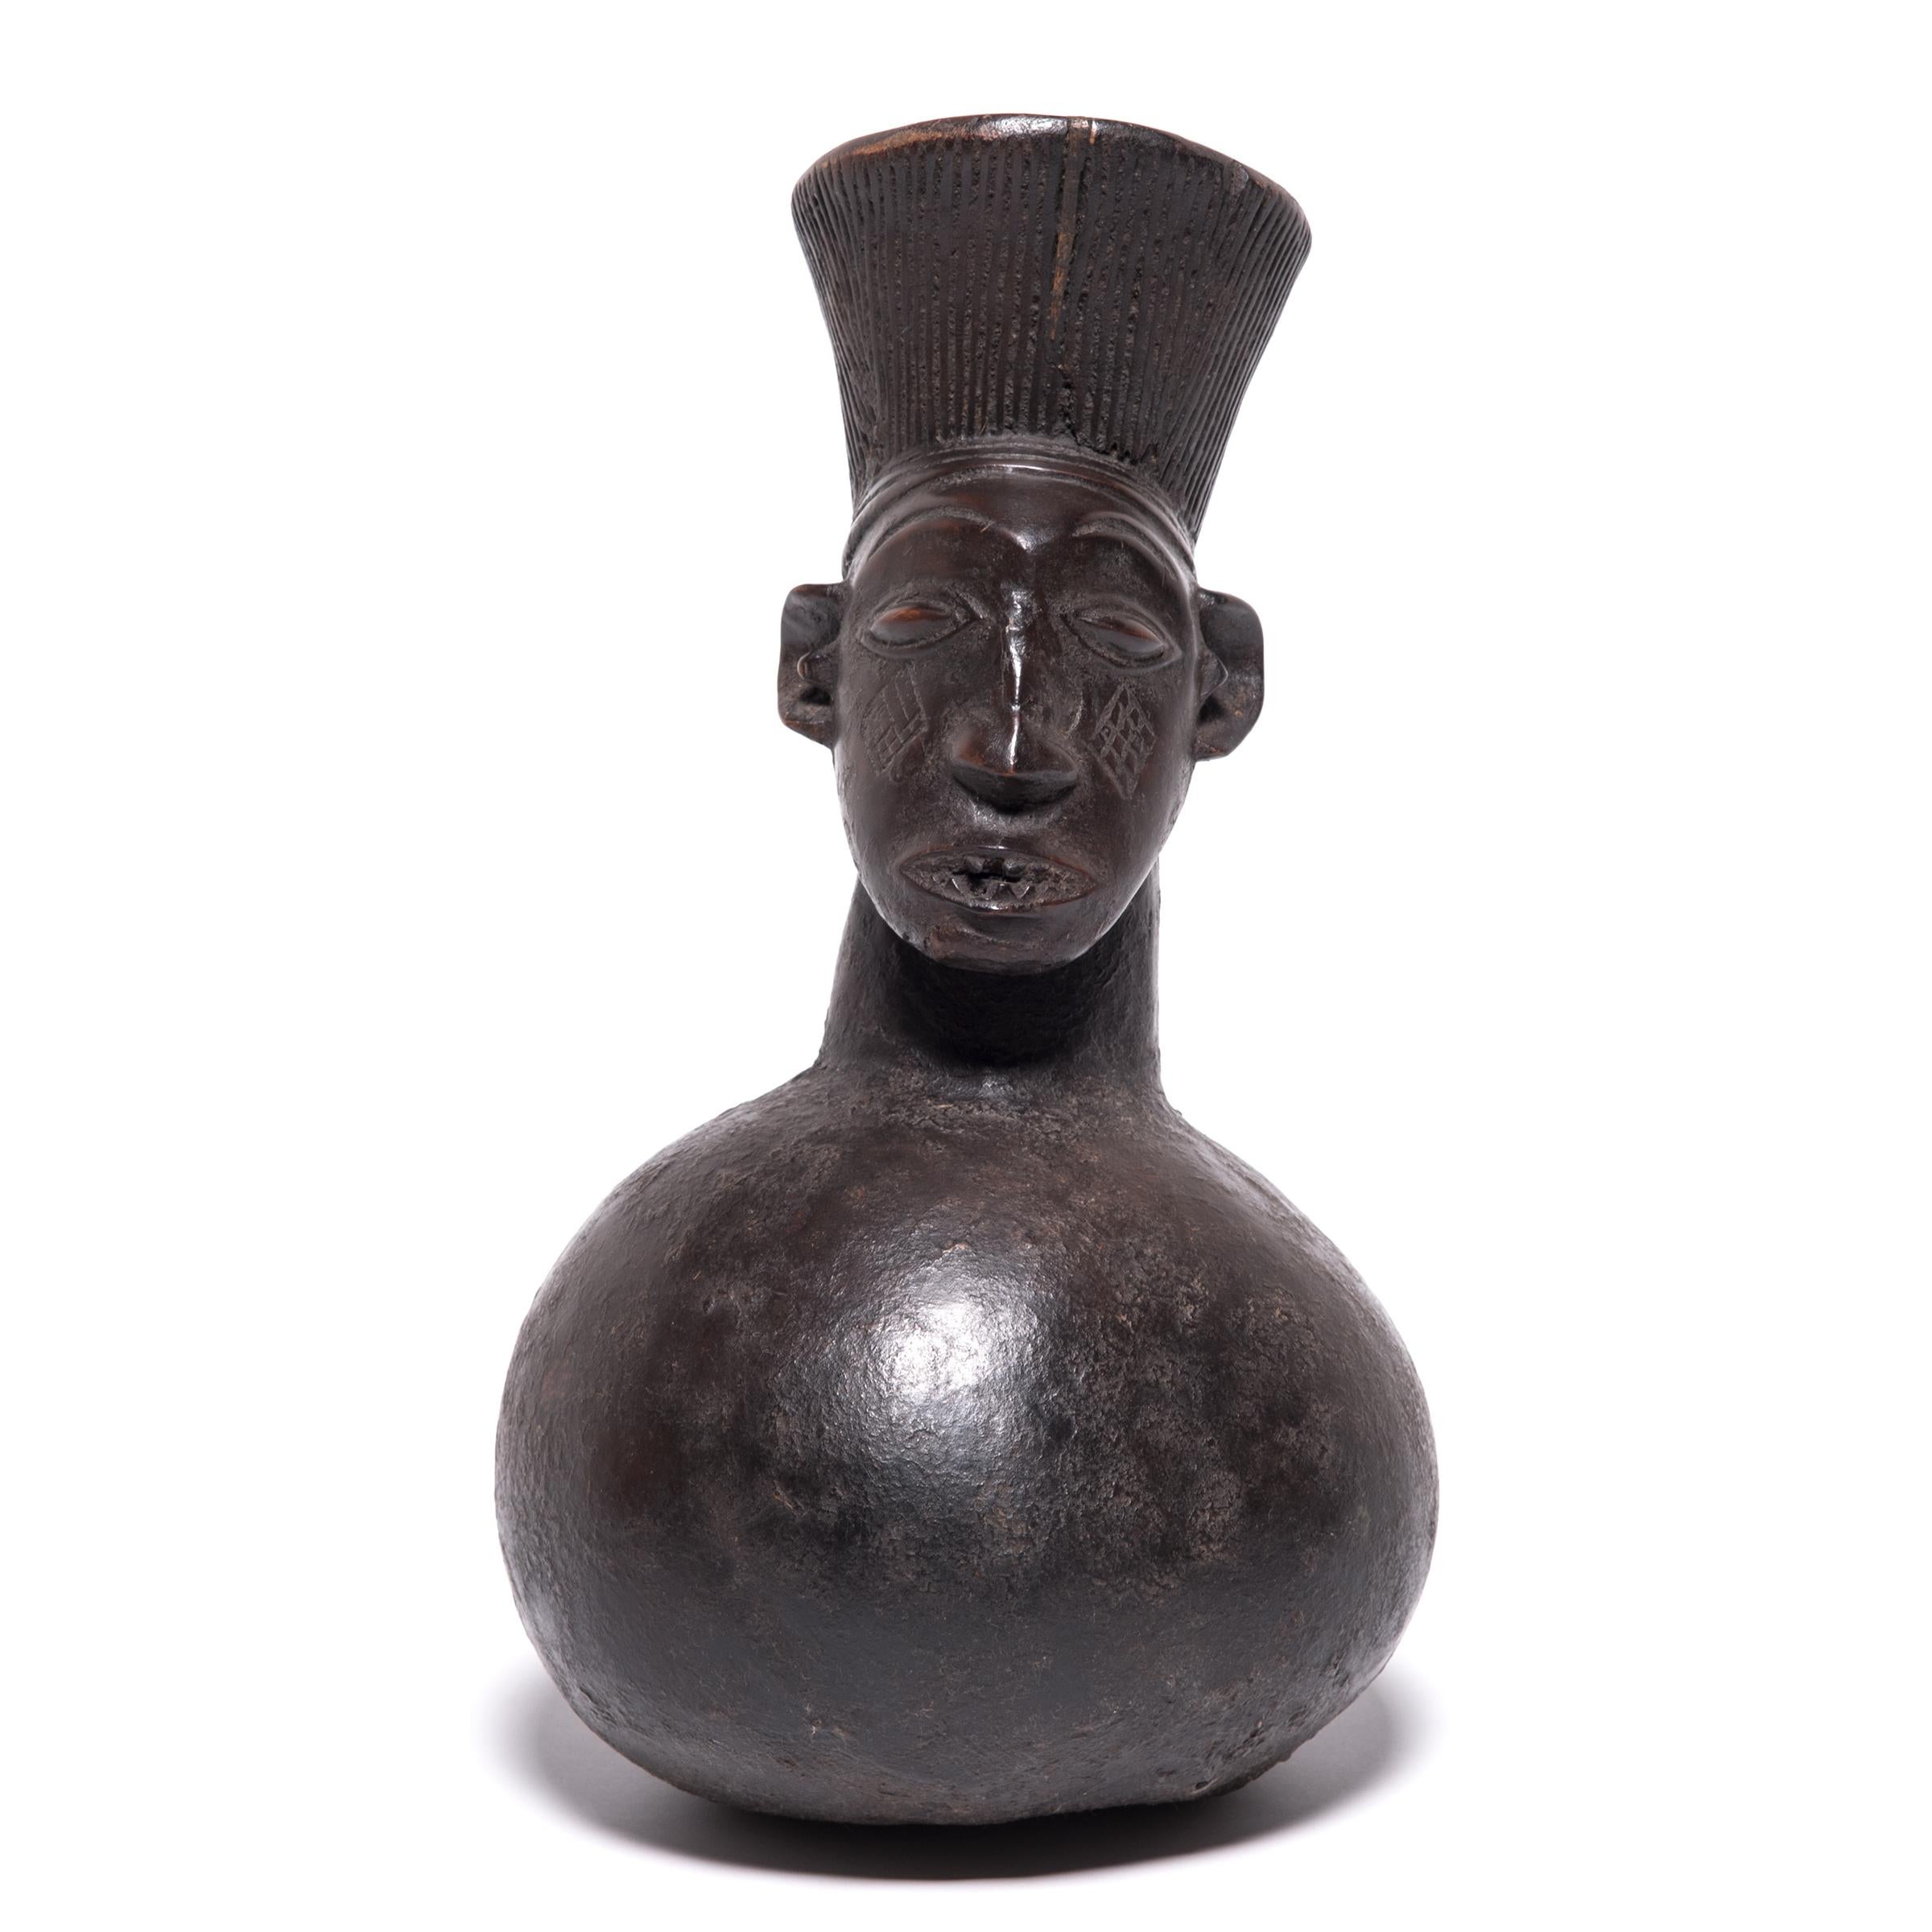 The Mangbetu people focused on highly realistic art forms. From the spout formed to look like hair, through the face, and down to the gourd shaped base, this jug seamlessly transitions between forms, marking it as a master work. The face depicts an